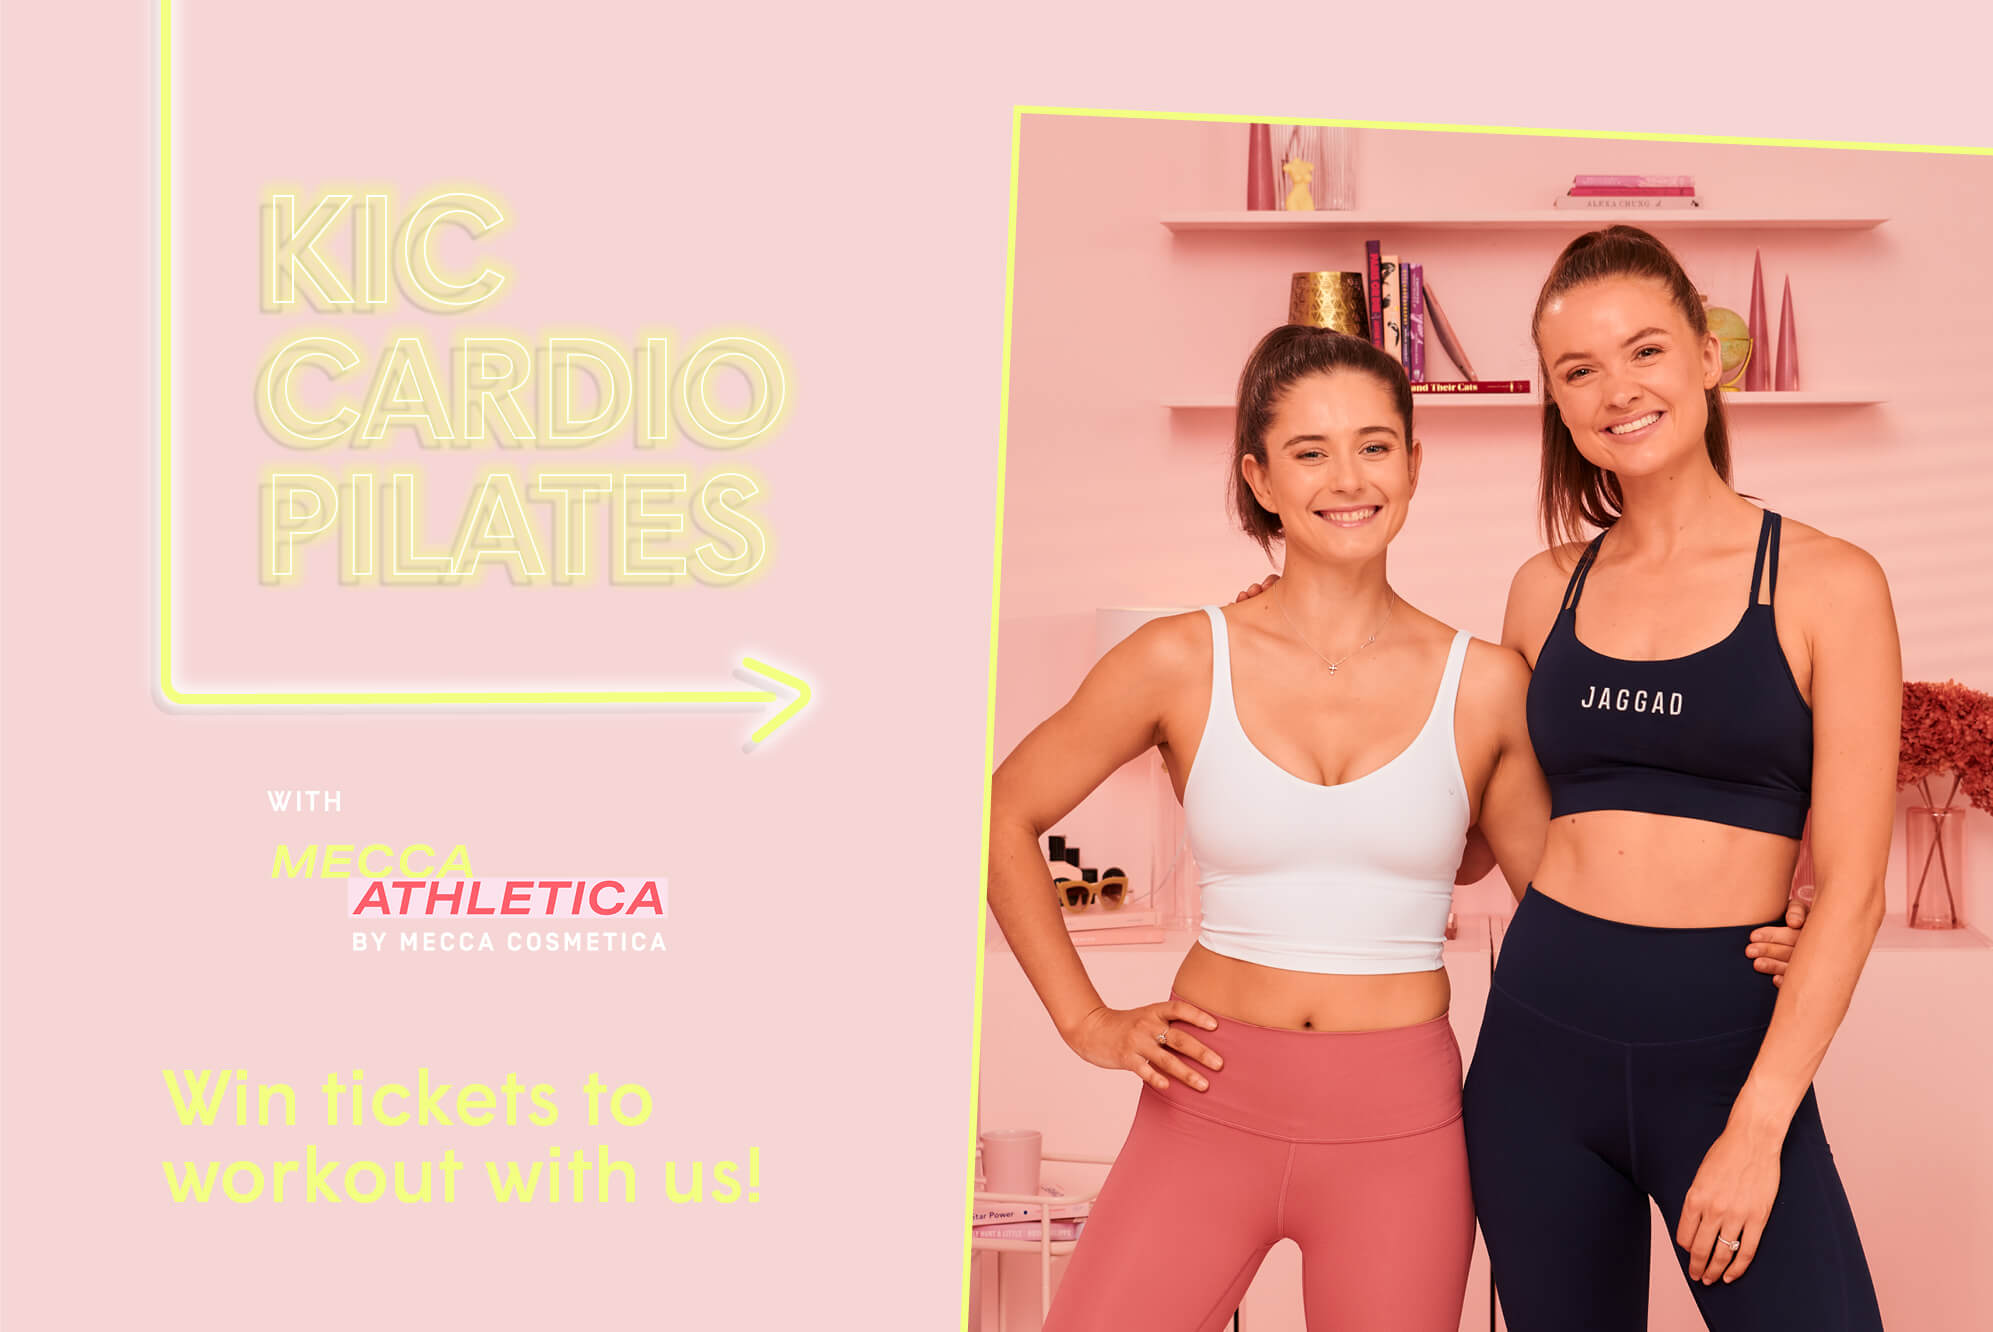 Win tickets to a Cardio Pilates workout!